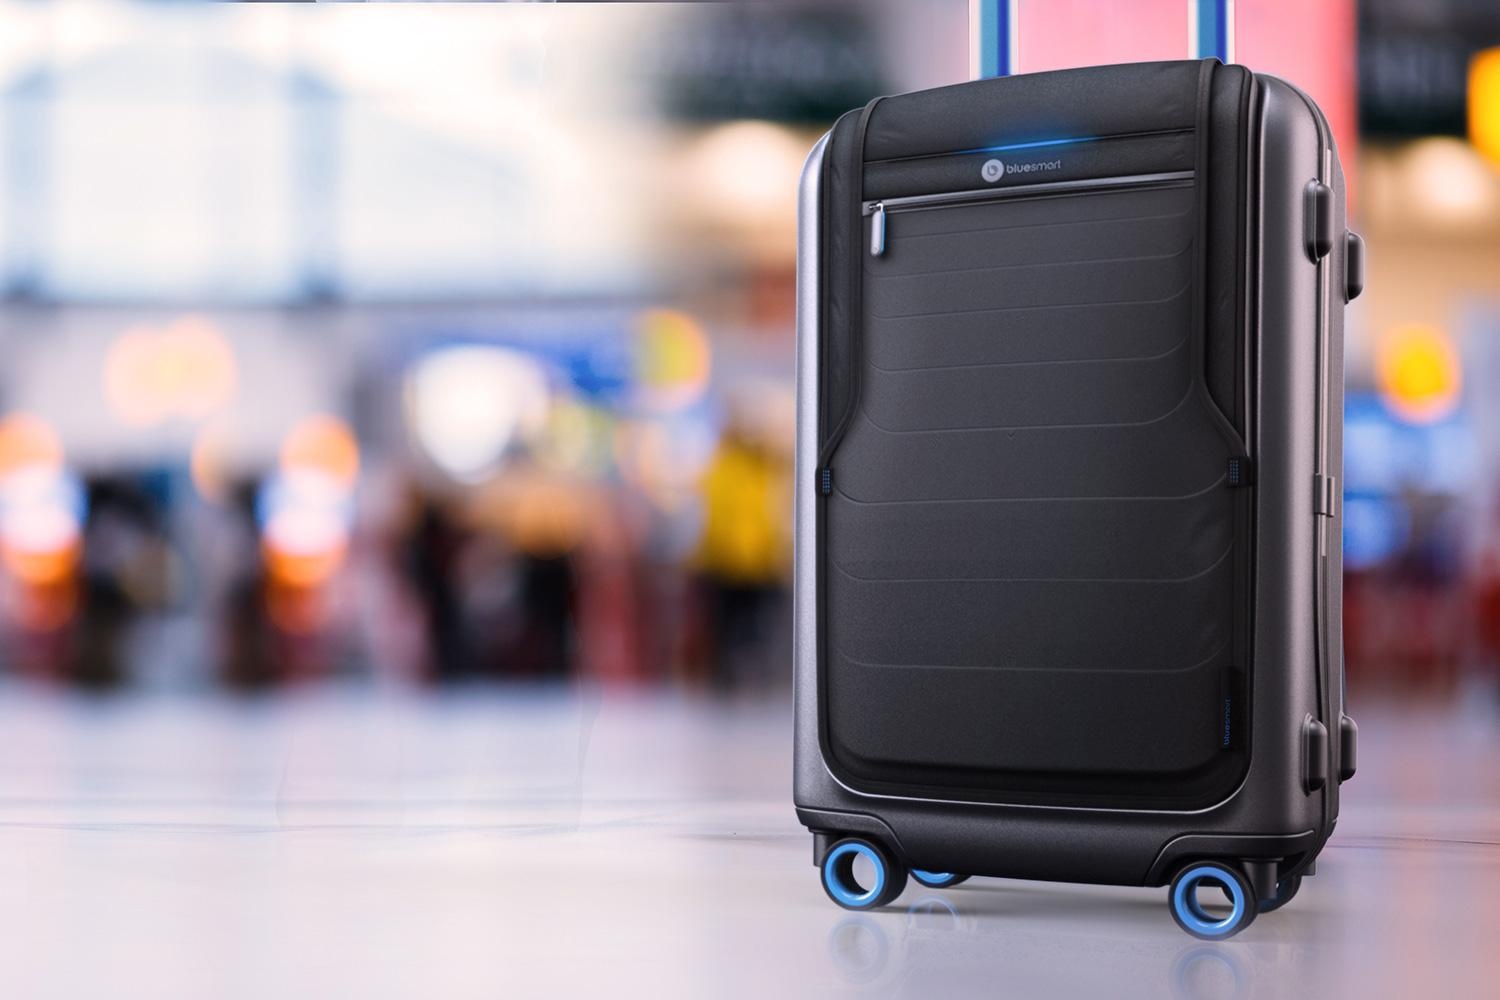 bluesmart-connected-suitcase-airport-1500×1000